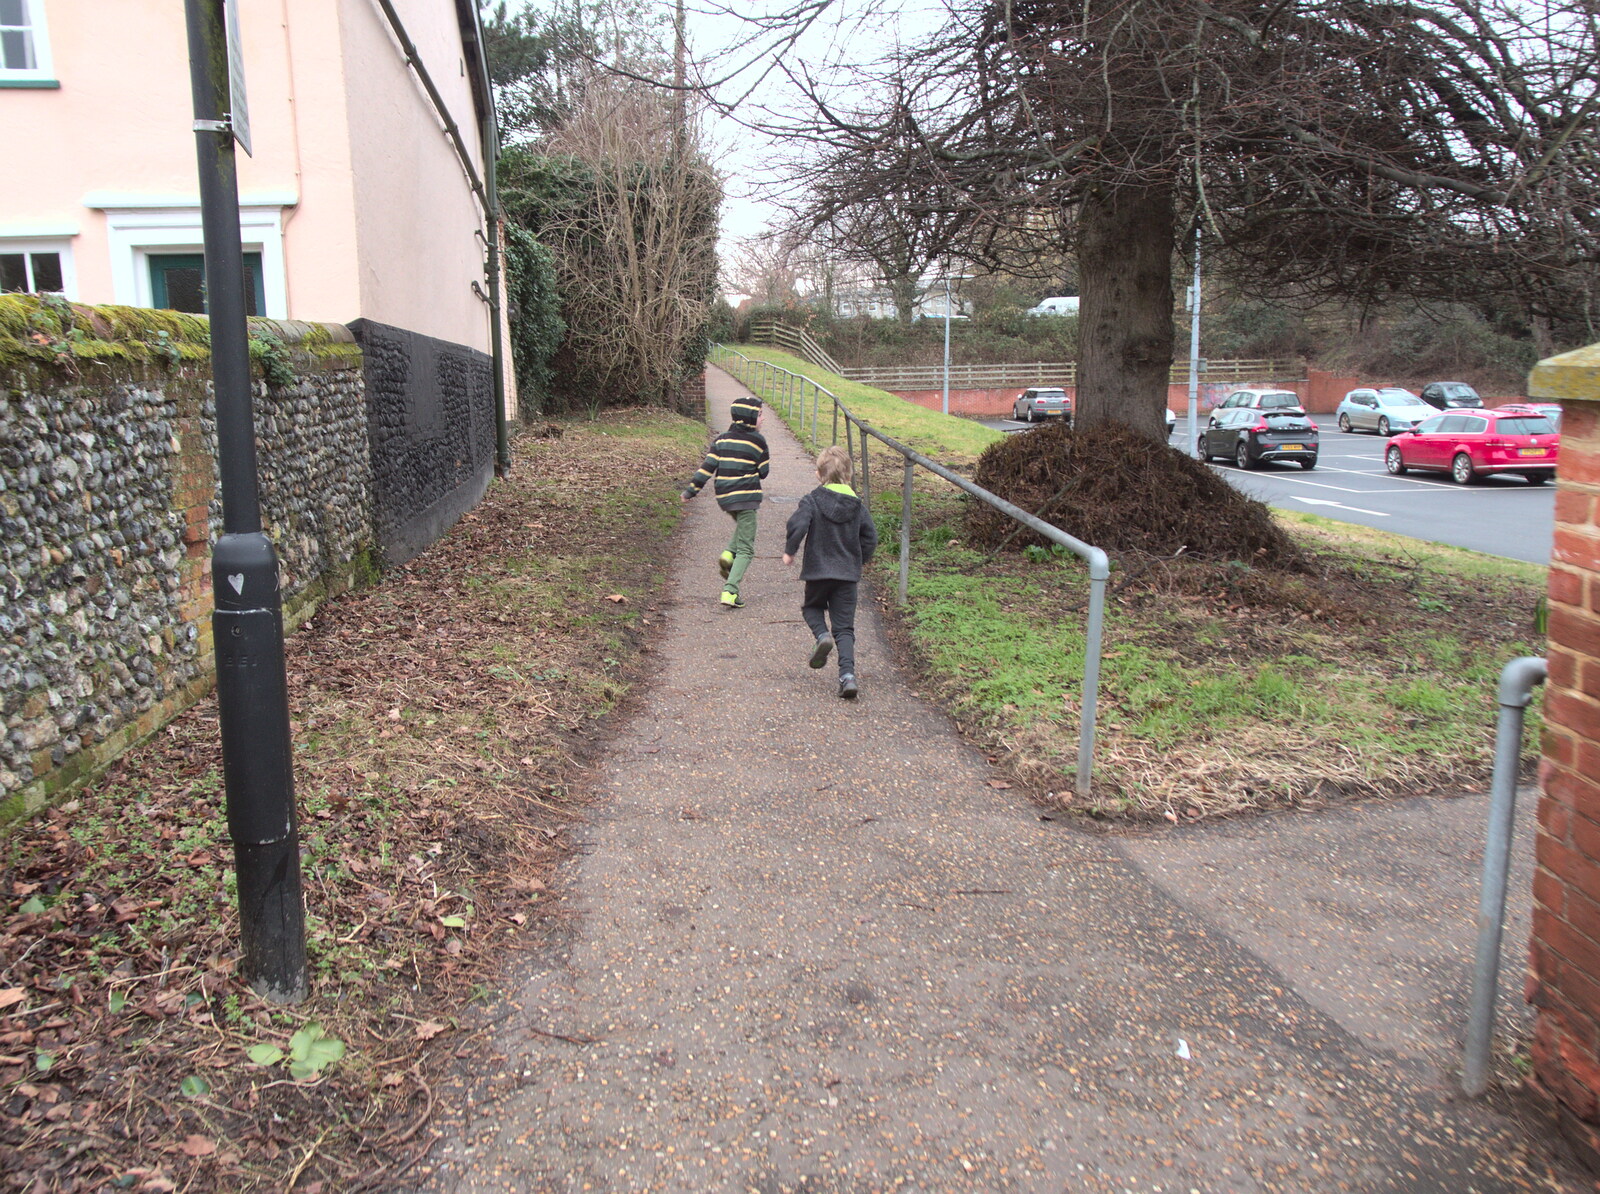 The boys run off up the hill past the surgery from Paddington Fire Alarms and Mere Moments Café, Diss, Norfolk - 2nd February 2018